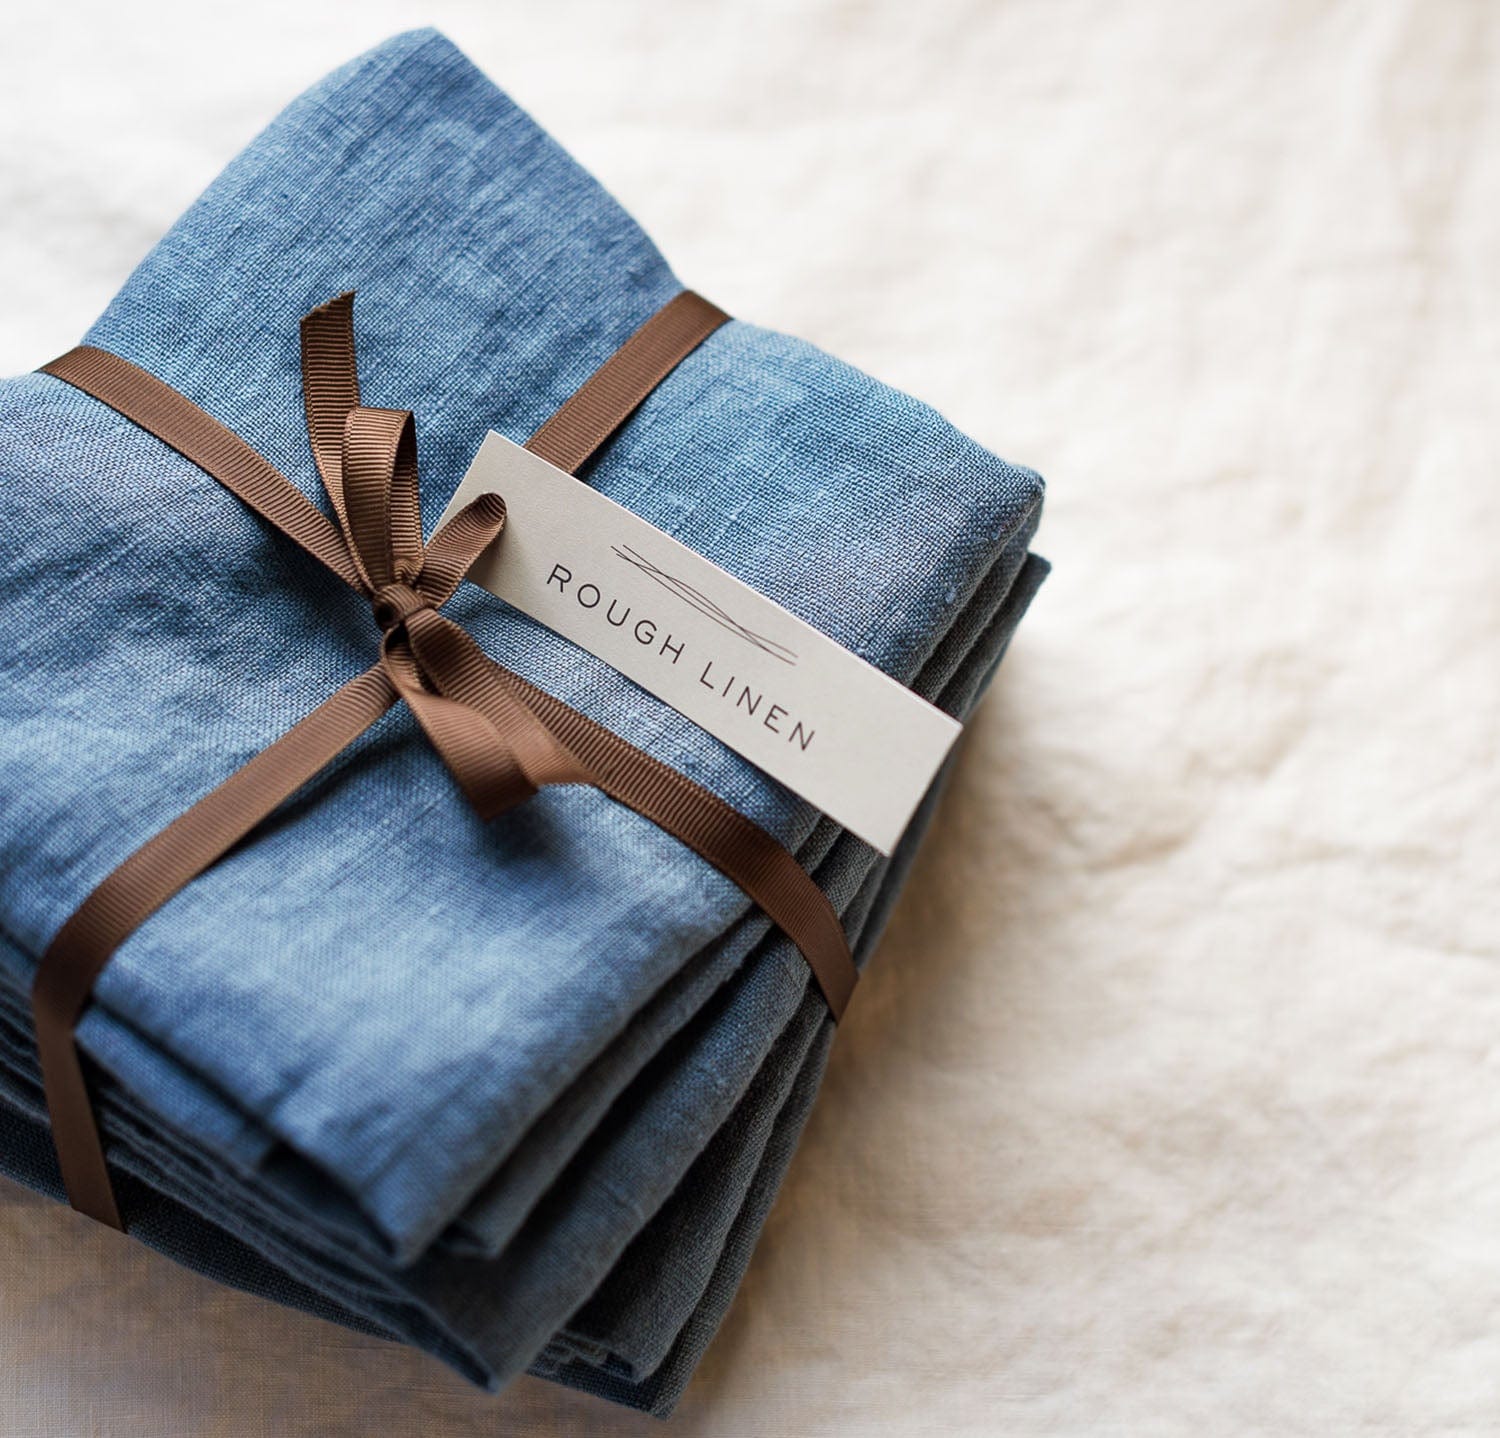 The Best Linen Towels for Sprucing Up Your Kitchen